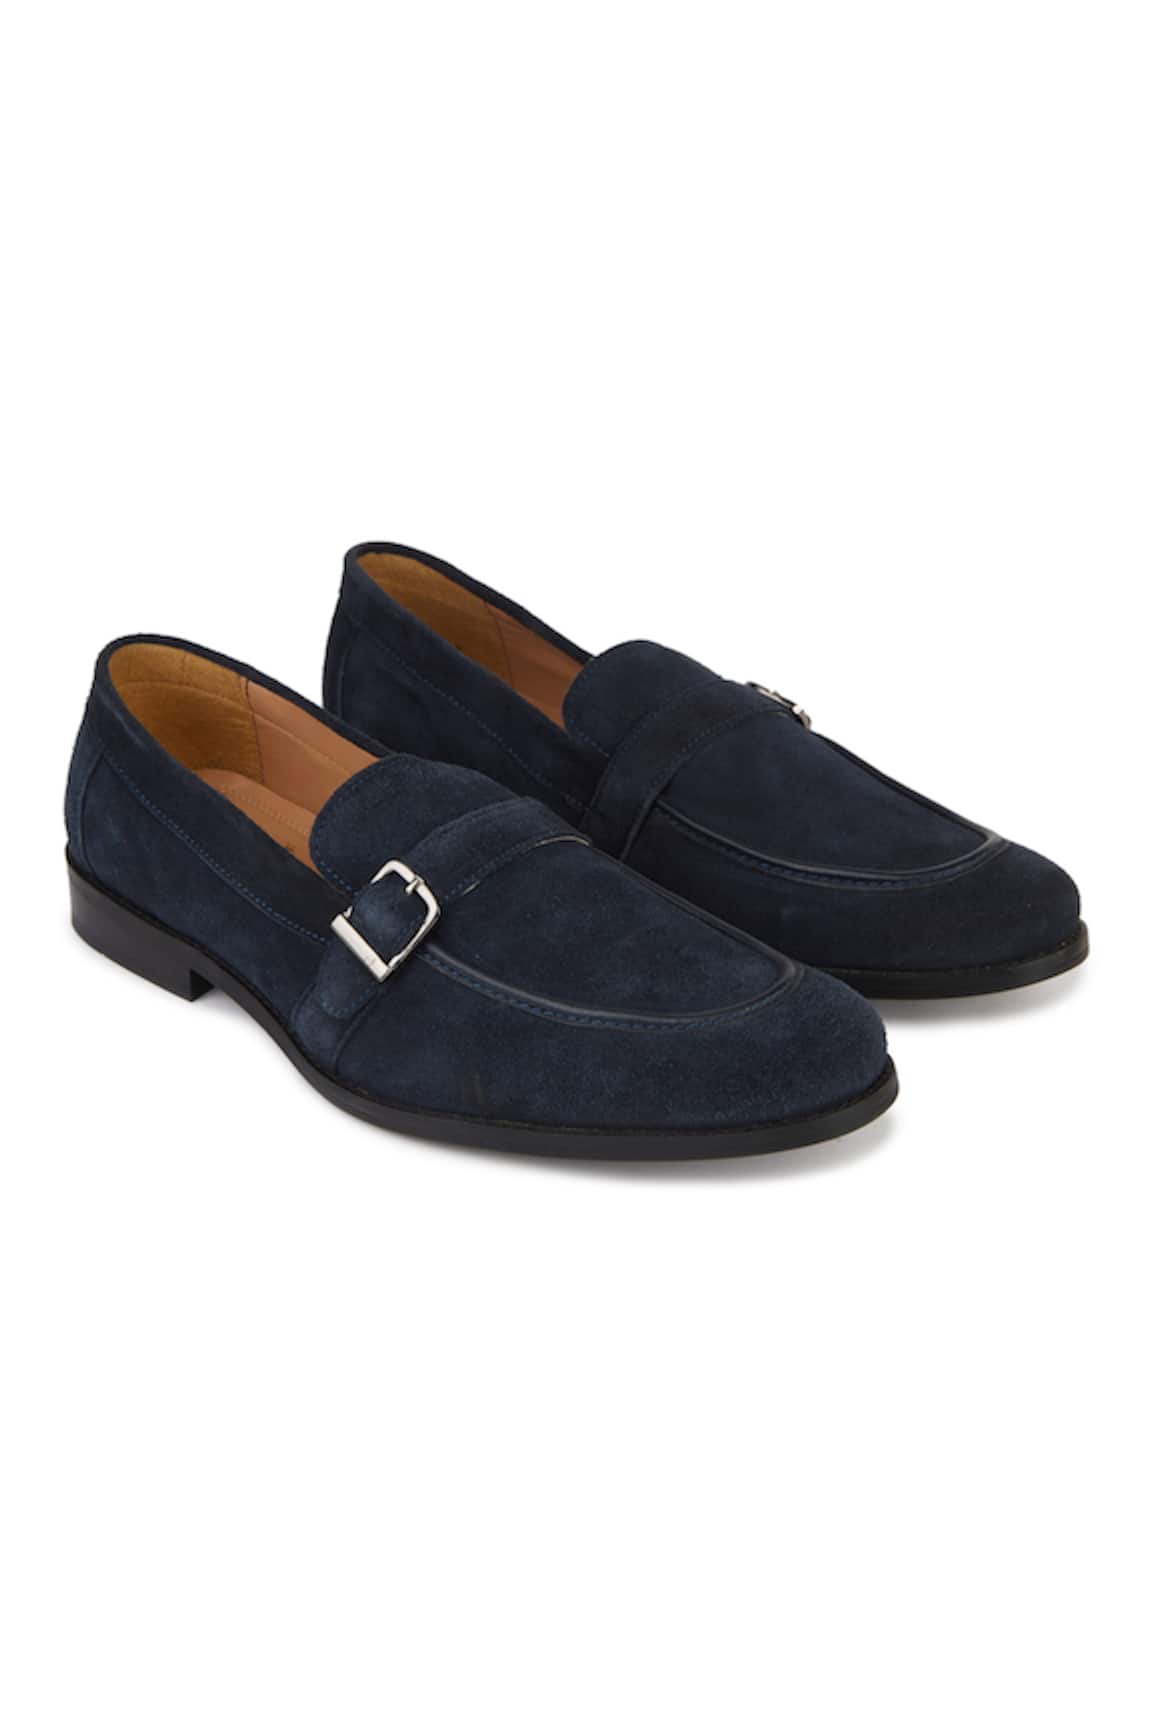 Hats Off Accessories Metal Buckle Suede Monk Penny Loafers